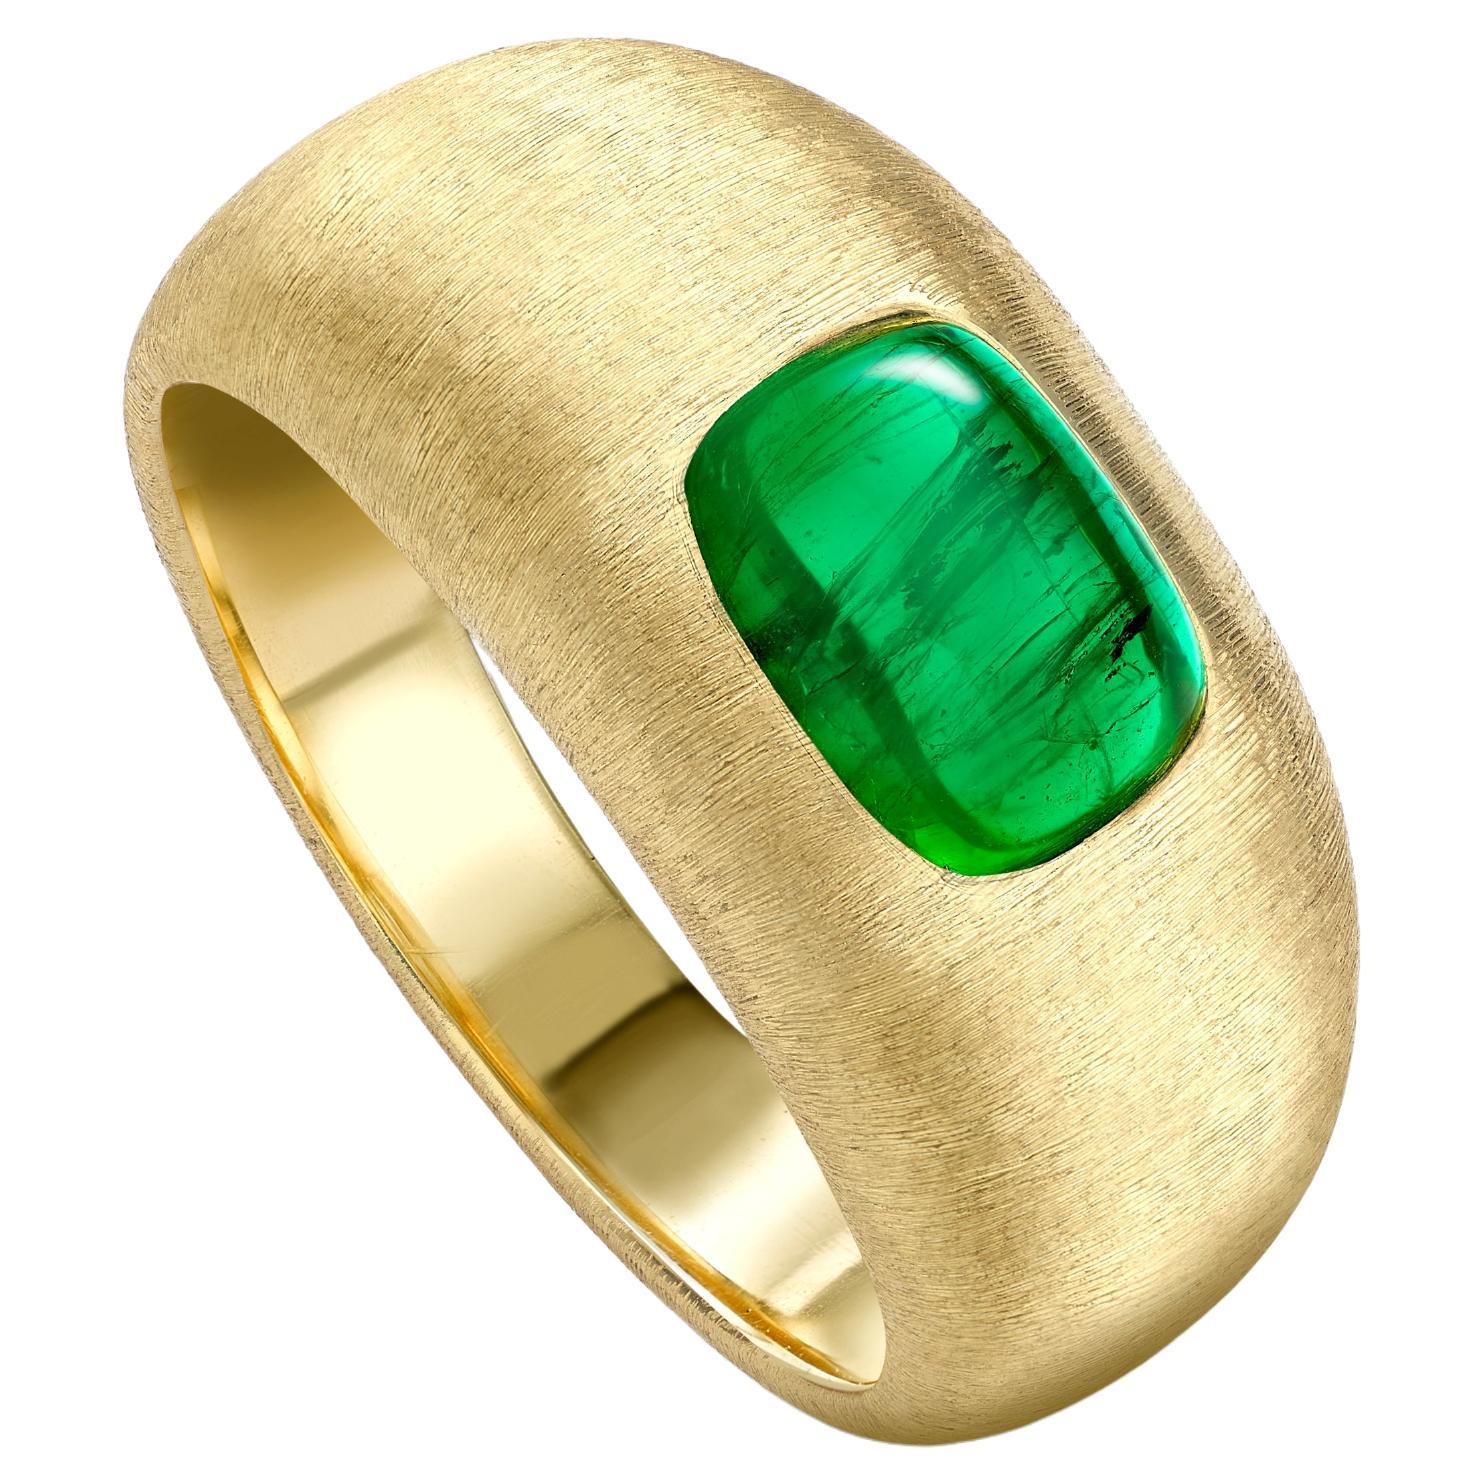 SILK RING Yellow gold with an emerald cabochon at the centre by Liv Luttrell For Sale